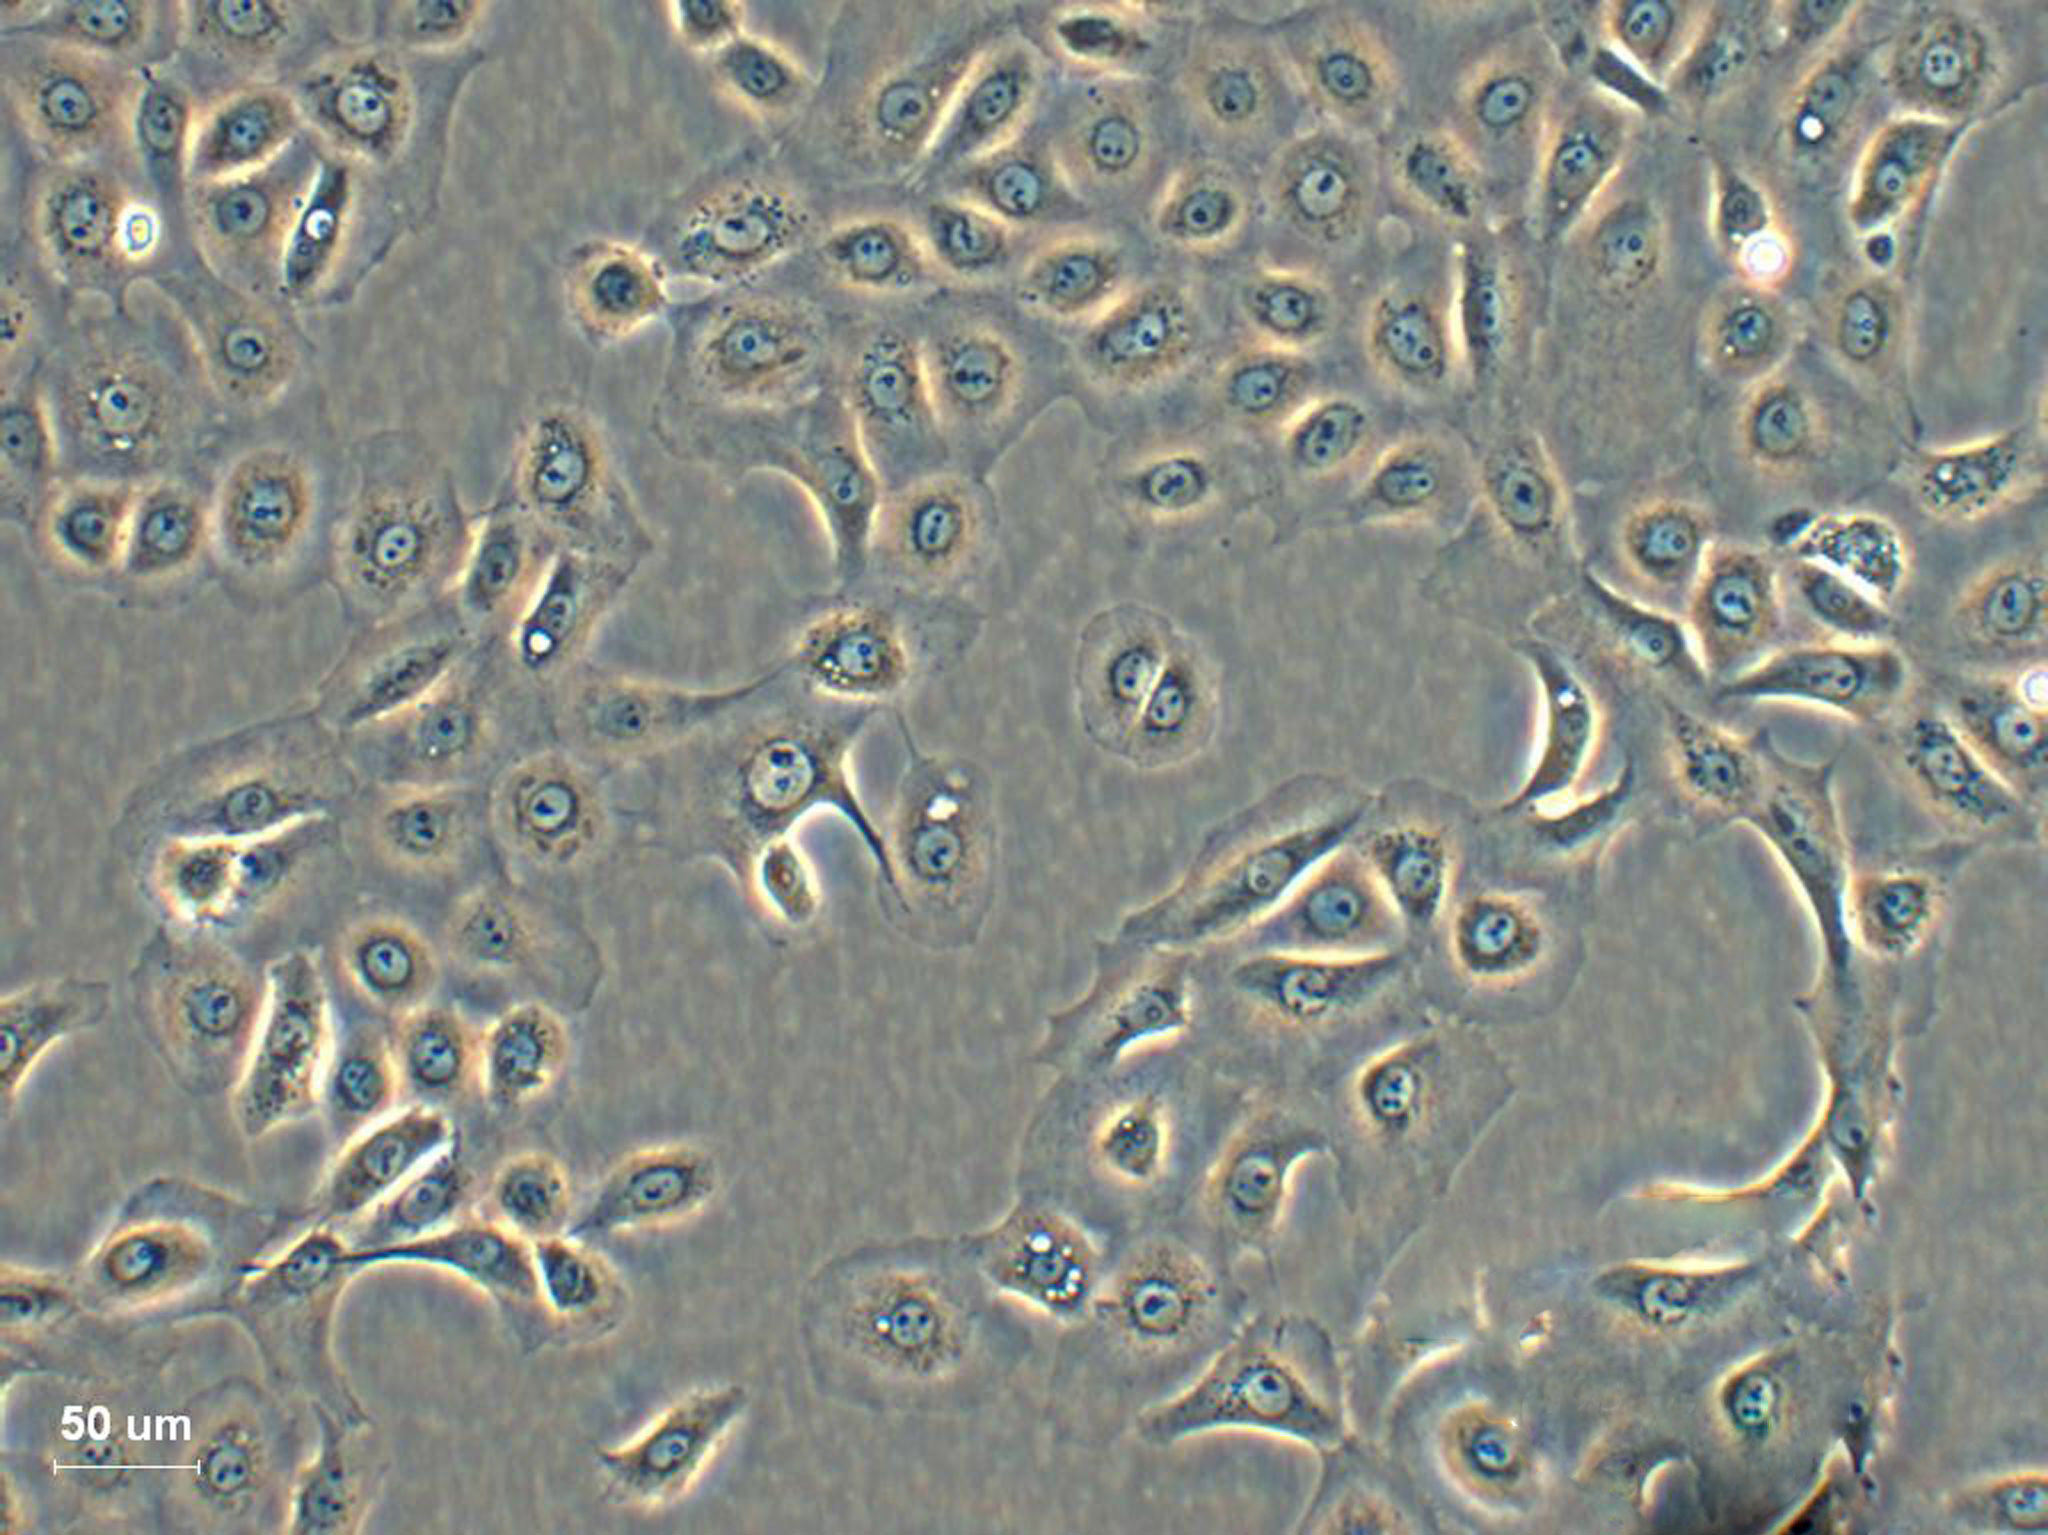 COR-L279 Epithelial Cell|人肺小细胞癌传代细胞(有STR鉴定),COR-L279 Epithelial Cell